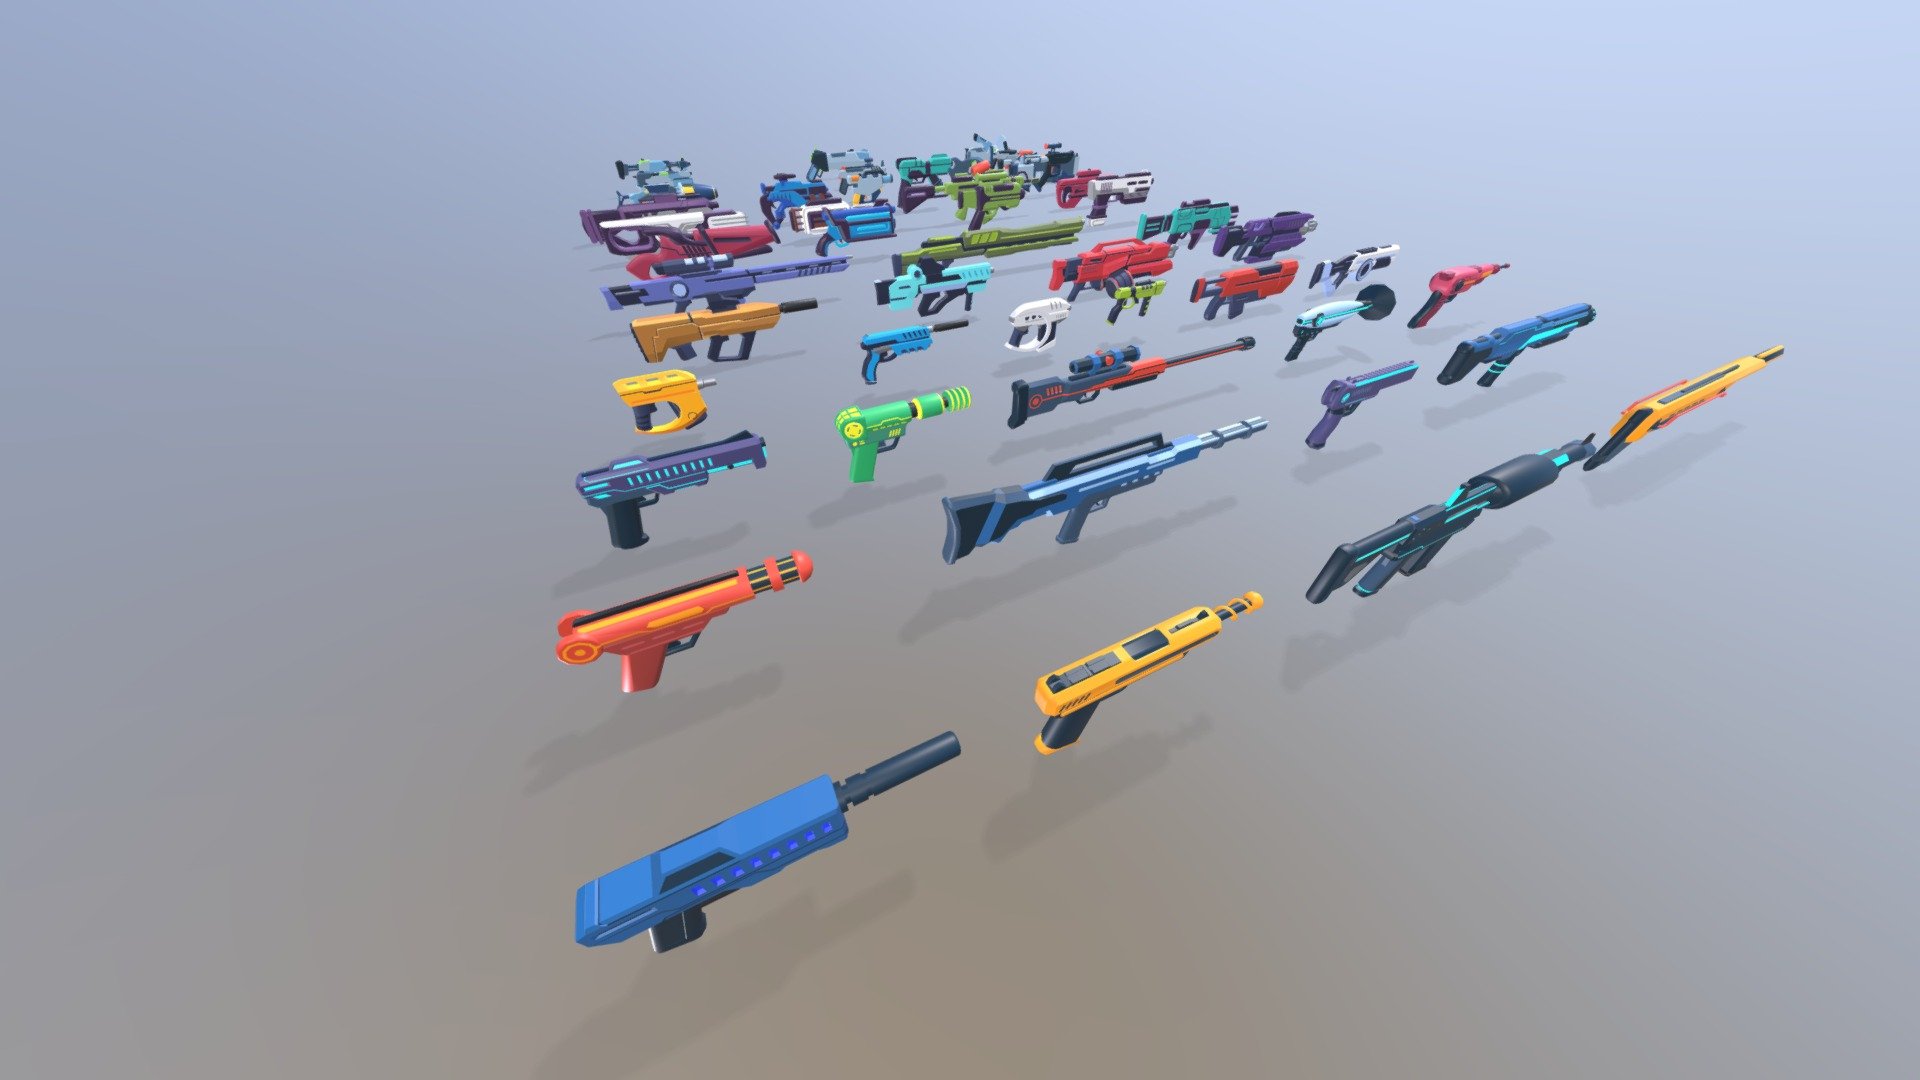 Toon Sci-Fi Guns Bundle Package is a combination of 4 packages and includes 47 different and creative models of Sci -Fi Guns is cartoon style.

Toon Sci-Fi Guns 01 Vertices:
Gun 01: 1000
Gun 02: 1019
Gun 03: 835
Gun 04: 876
Gun 05: 1006
Gun 06: 751
Gun 07: 1086
Gun 08: 687
Gun 09: 1283
Gun 010: 919
Gun 011: 1085
Gun 012: 626
Average Polygon is 753

Toon Sci-Fi Guns 02 Vertices:
Gun 01: 626
Gun 02: 448
Gun 03: 554
Gun 04: 404
Gun 05: 388
Gun 06: 803
Gun 07: 556
Gun 08: 487
Gun 09: 671
Gun 10: 662
Average Polygon is 560

Toon Sci-Fi Guns 03 Vertices:
Gun 01: 951
Gun 02: 523
Gun 03: 682
Gun 04: 754
Gun 05: 684
Gun 06: 568
Gun 07: 969
Gun 08: 556
Gun 09: 1081
Gun 10: 1043
Gun 11: 1002
Gun 12: 606
Average Polygon is 667

Toon Sci-Fi Guns 04 Vertices:
Gun 01: 662
Gun 02: 1026
Gun 03: 759
Gun 04: 800
Gun 05: 1228
Gun 06: 619
Gun 07: 1113
Gun 08: 1103
Gun 09: 1058
Gun 10: 827
Gun 11: 1459
Gun 12: 1227
Gun 13: 1433
Average Polygon is 1002 - Toon Sci Fi Guns Bundle - Buy Royalty Free 3D model by okaro.ir 3d model